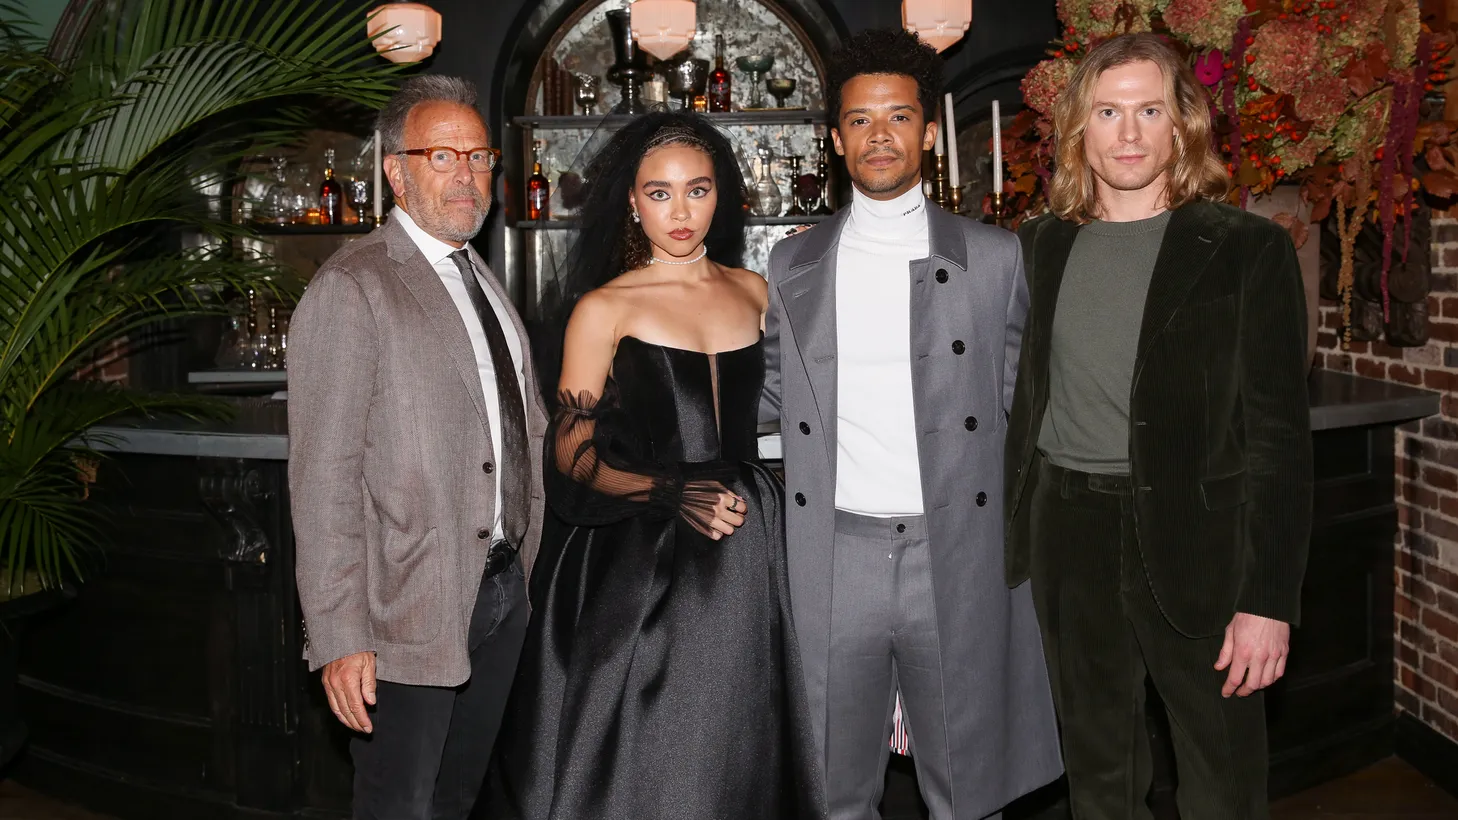 Mark Johnson (Left), Bailey Bass, Jacob Anderson, Sam Reid attend the Vanity Fair and AMC’s Advanced Screening of “Interview with the Vampire” in Manhattan on September 29, 2022.